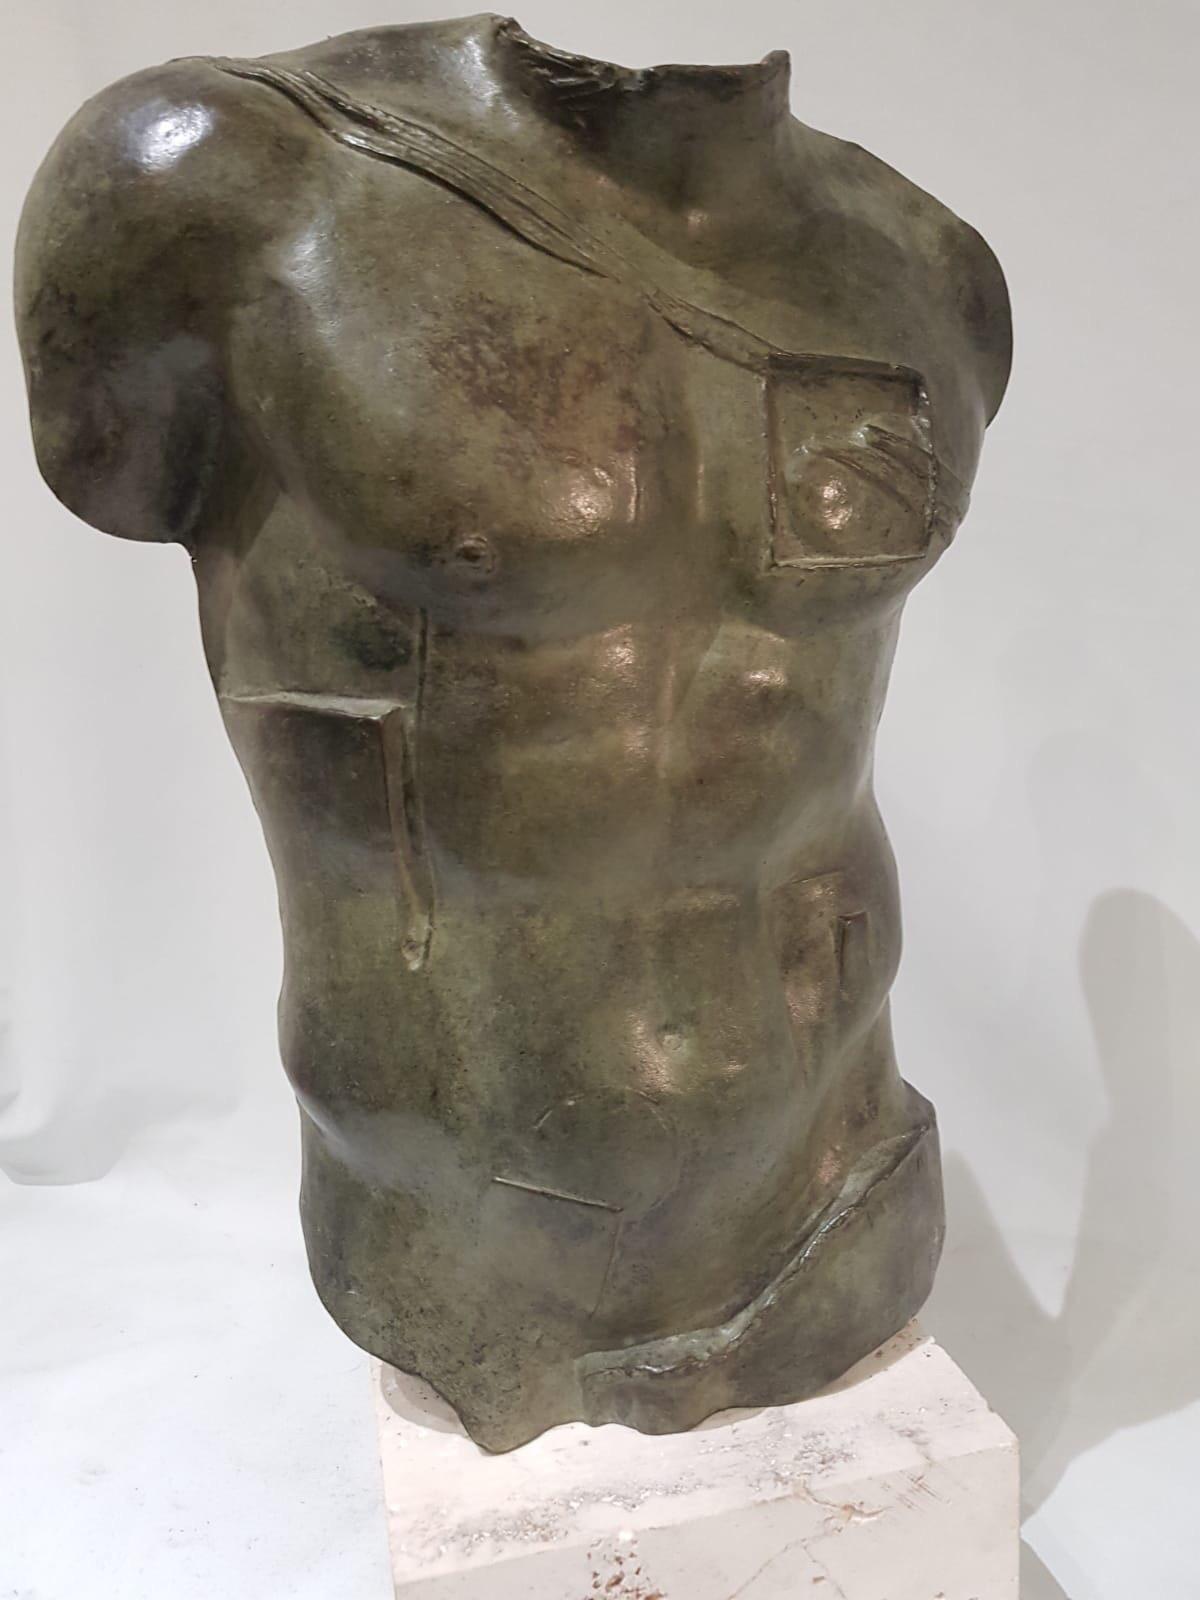 Igor Mitoraj (1944-2014)
“Persée” Torso in bronze with a green nuanced patina. The patina is especially beautiful and the quality of the cast also.
Signed Igor Mitoraj and numbered D300/1000 HC
White stone base.
The bronze comes with its